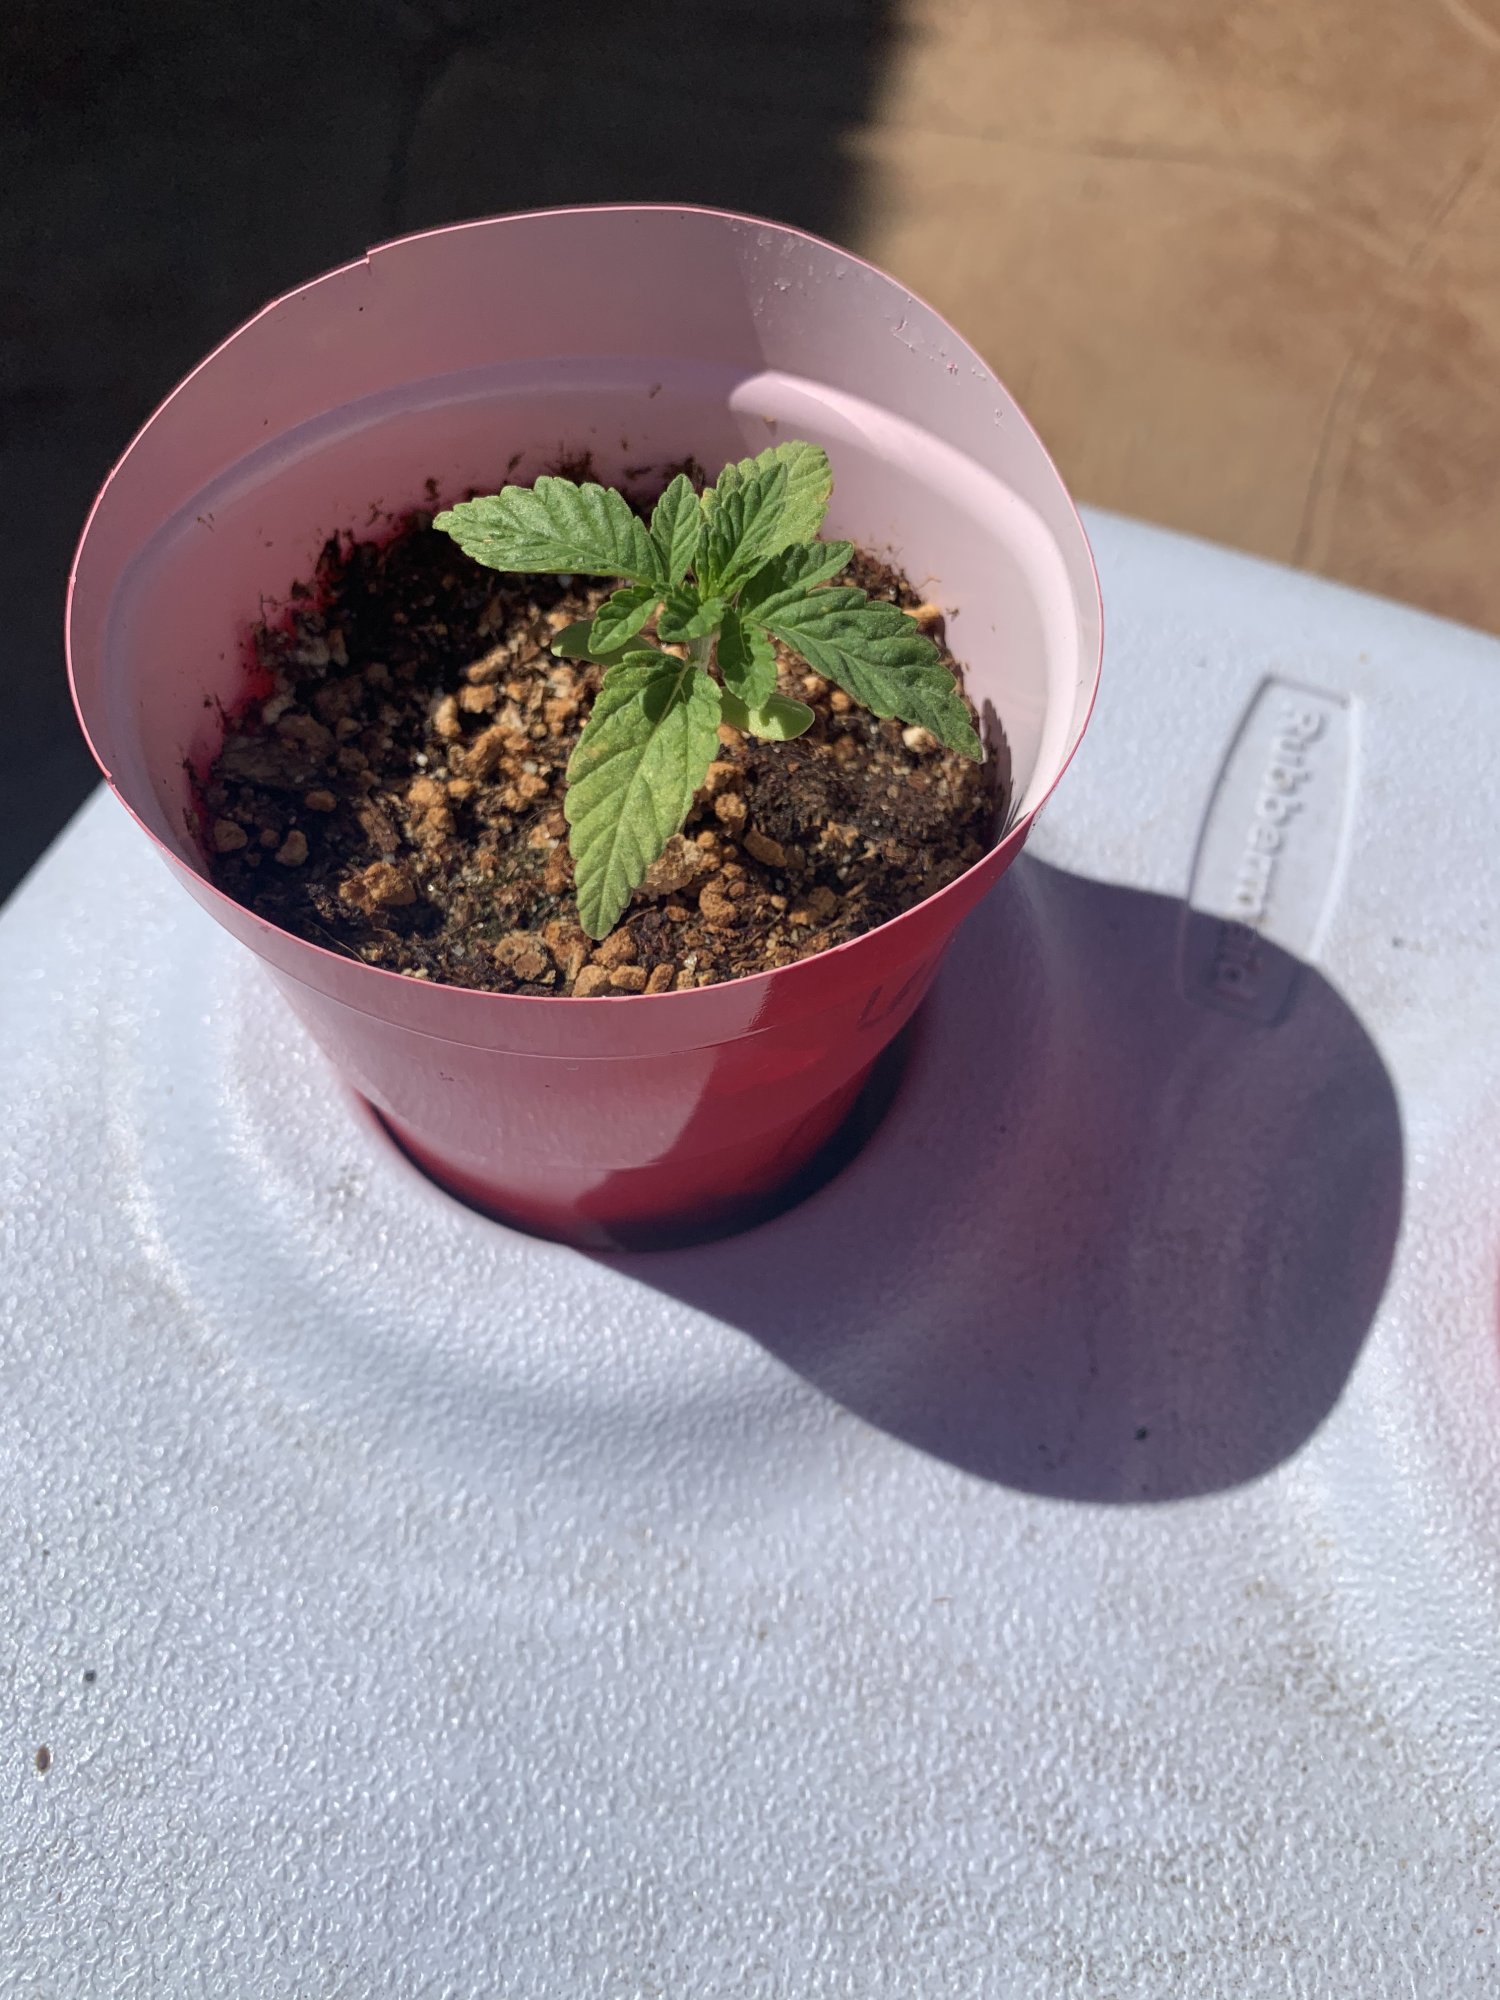 Update first time grower advice please 2